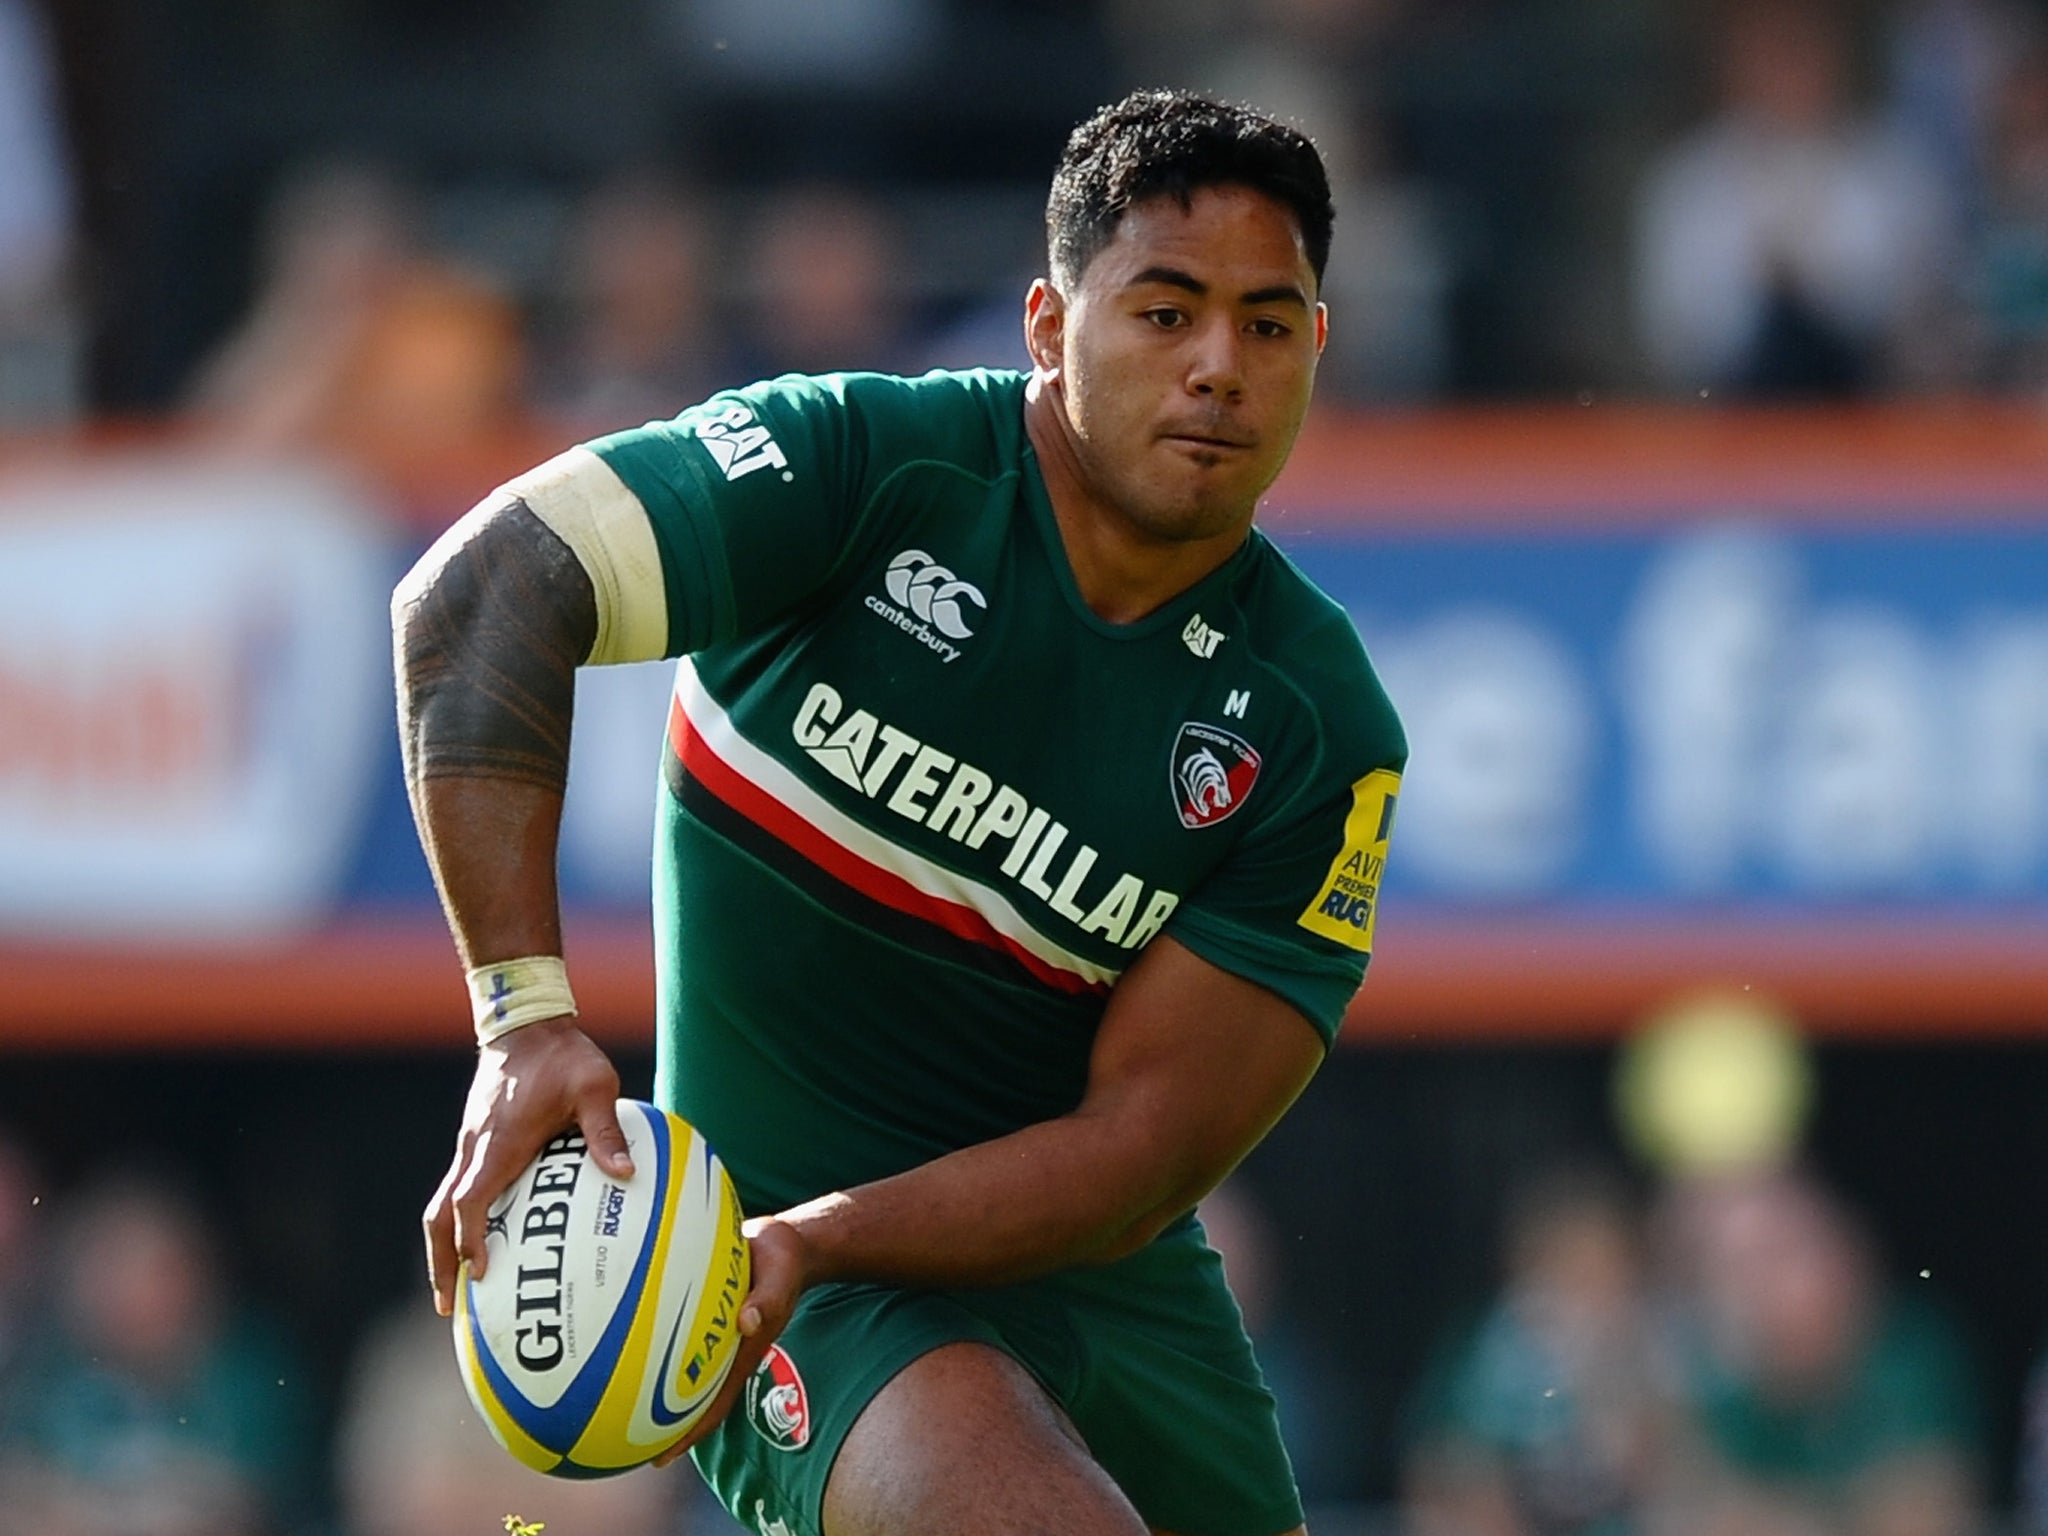 Manu Tuilagi will make his return from a pectoral muscle injury in Leicester's Aviva Premiership match against Newcastle